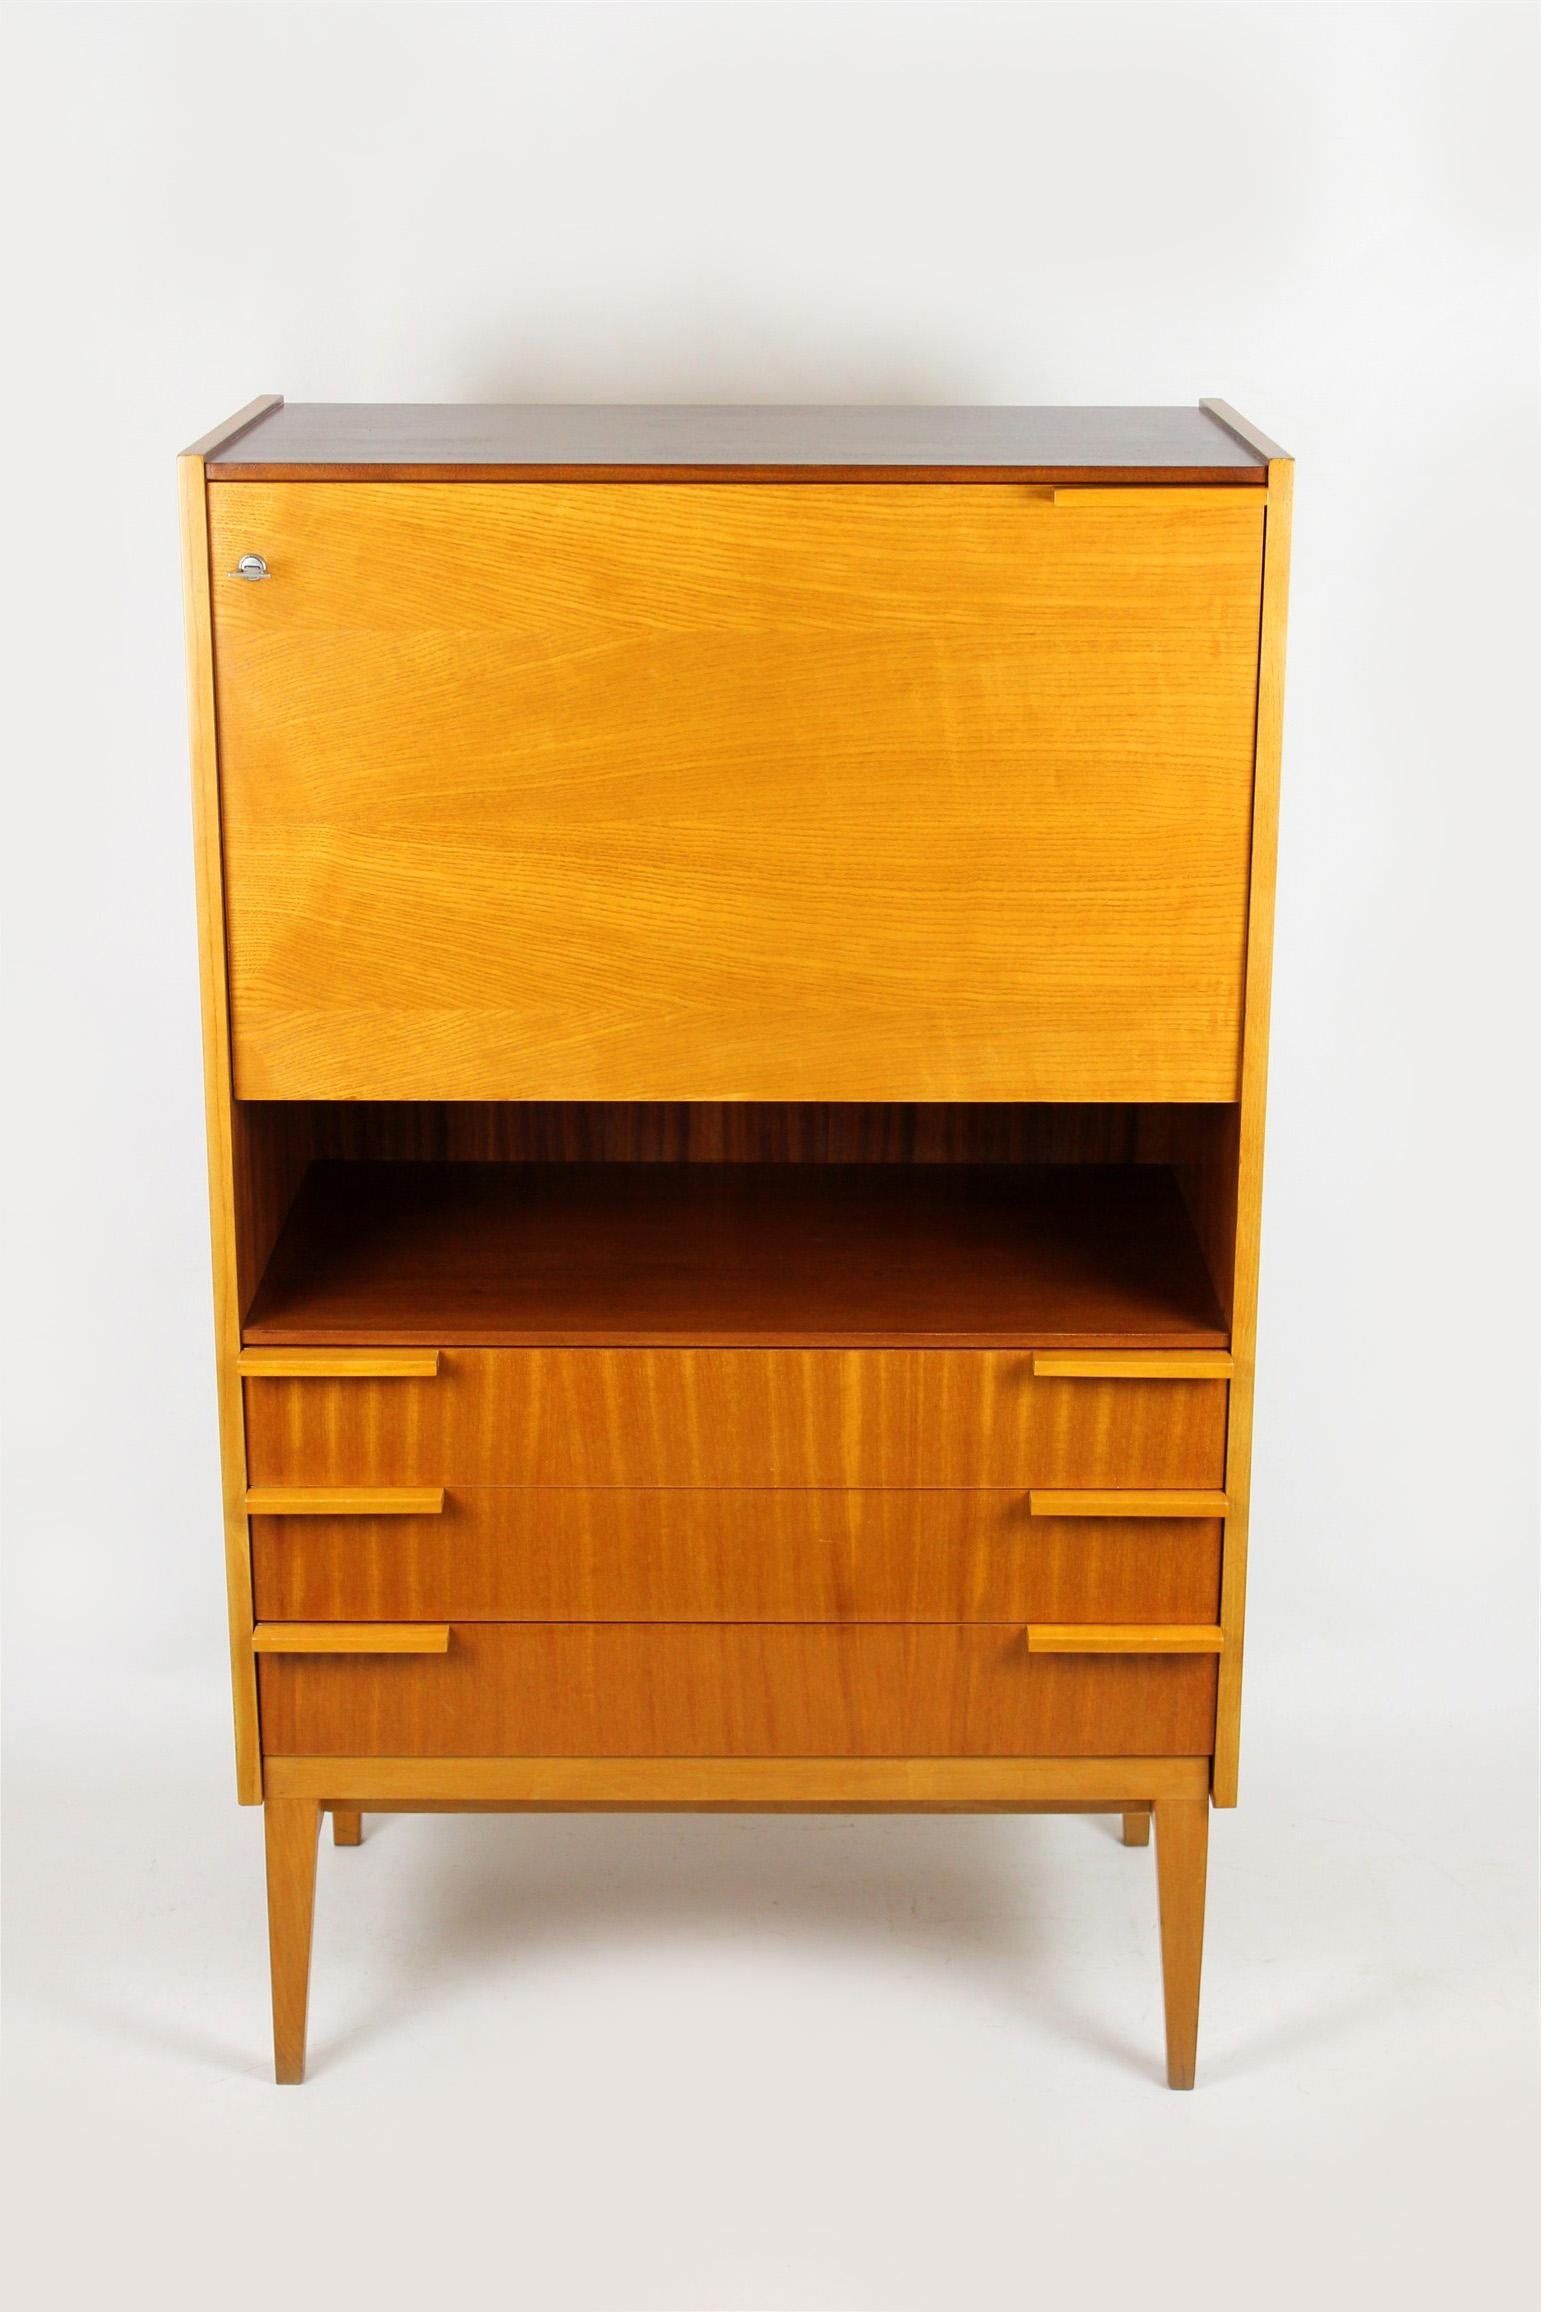 Midcentury secretary desk, designed by František Mezulaník for UP Bucovice in former Czechoslovakia in the 1960s. Features three drawers and five shelf dividers.